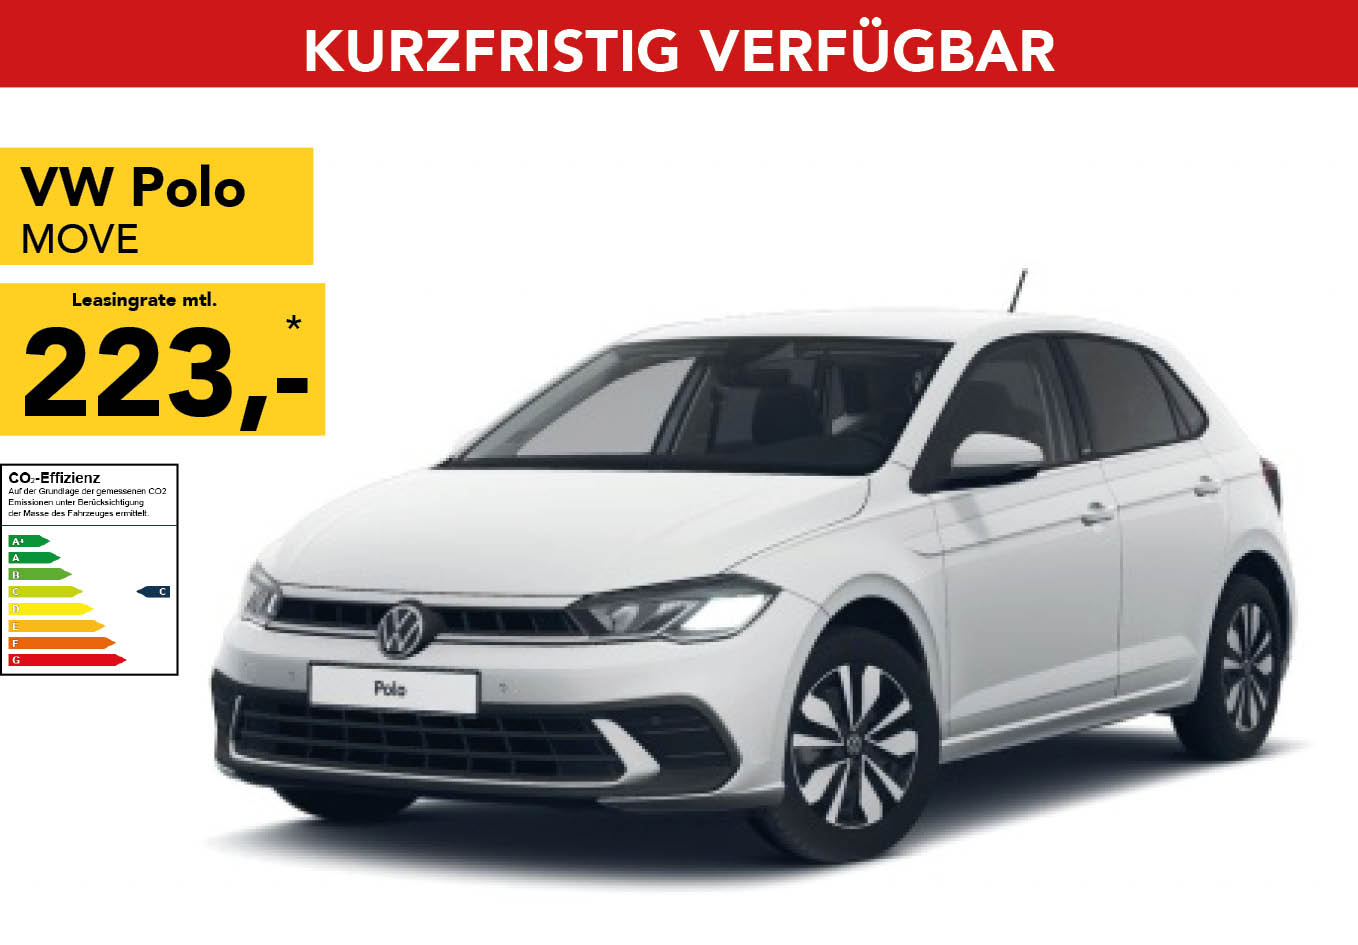 VW Polo MOVE - Privatleasing-Angebot